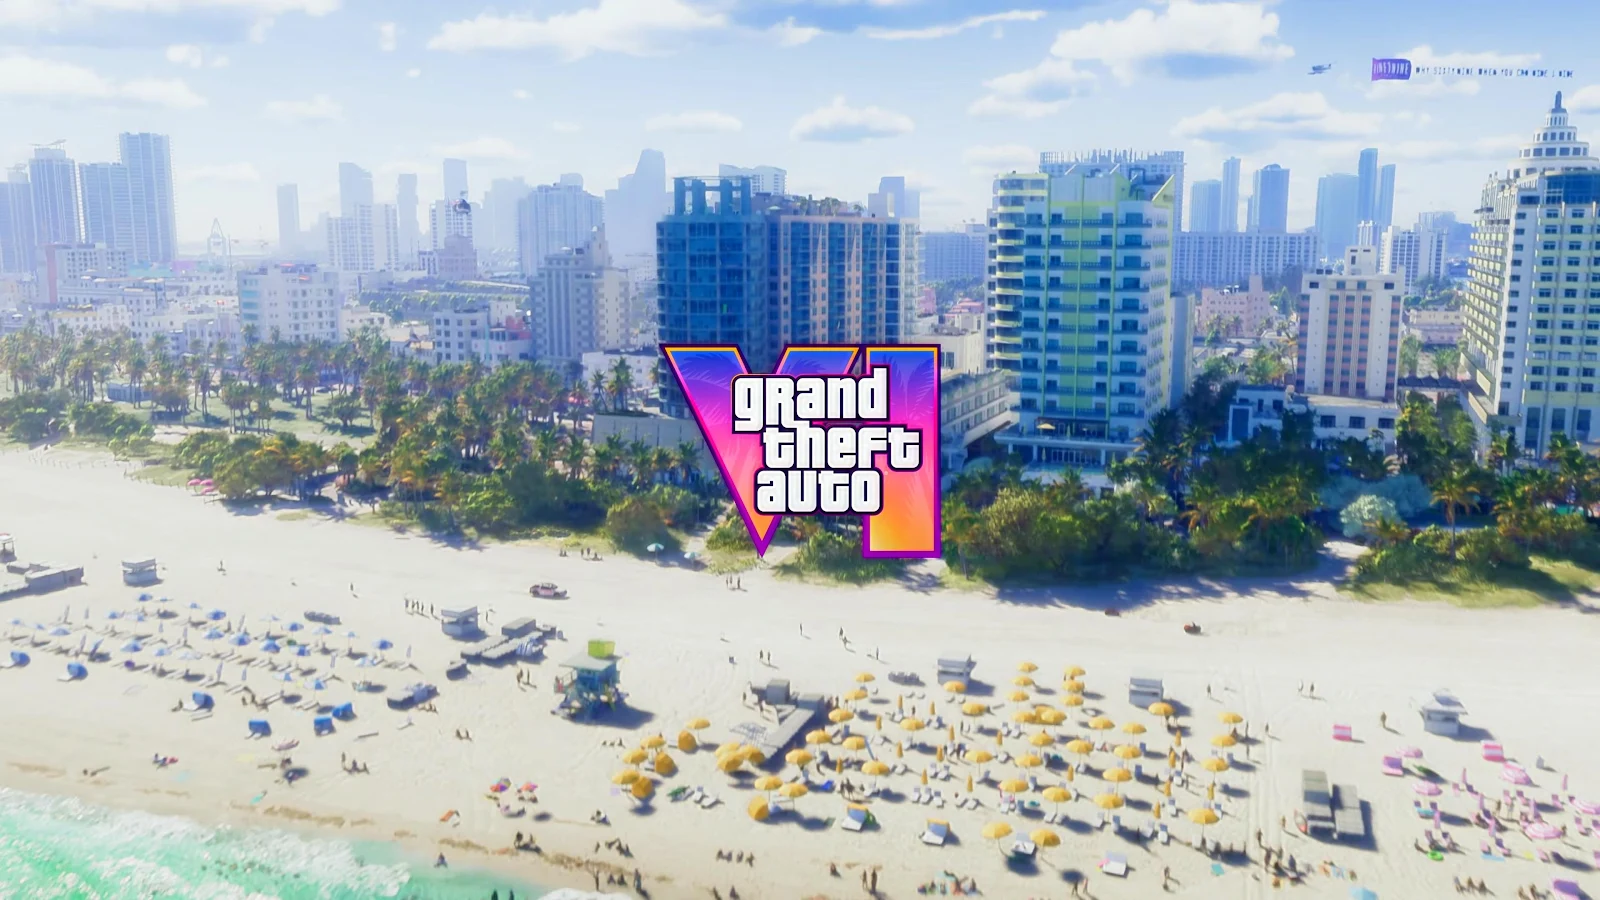 A Cool Grand Theft Auto VI, GTA 6, Trailer, Vice City 4K Wallpaper for Free Download in High Quality [3840x2160]